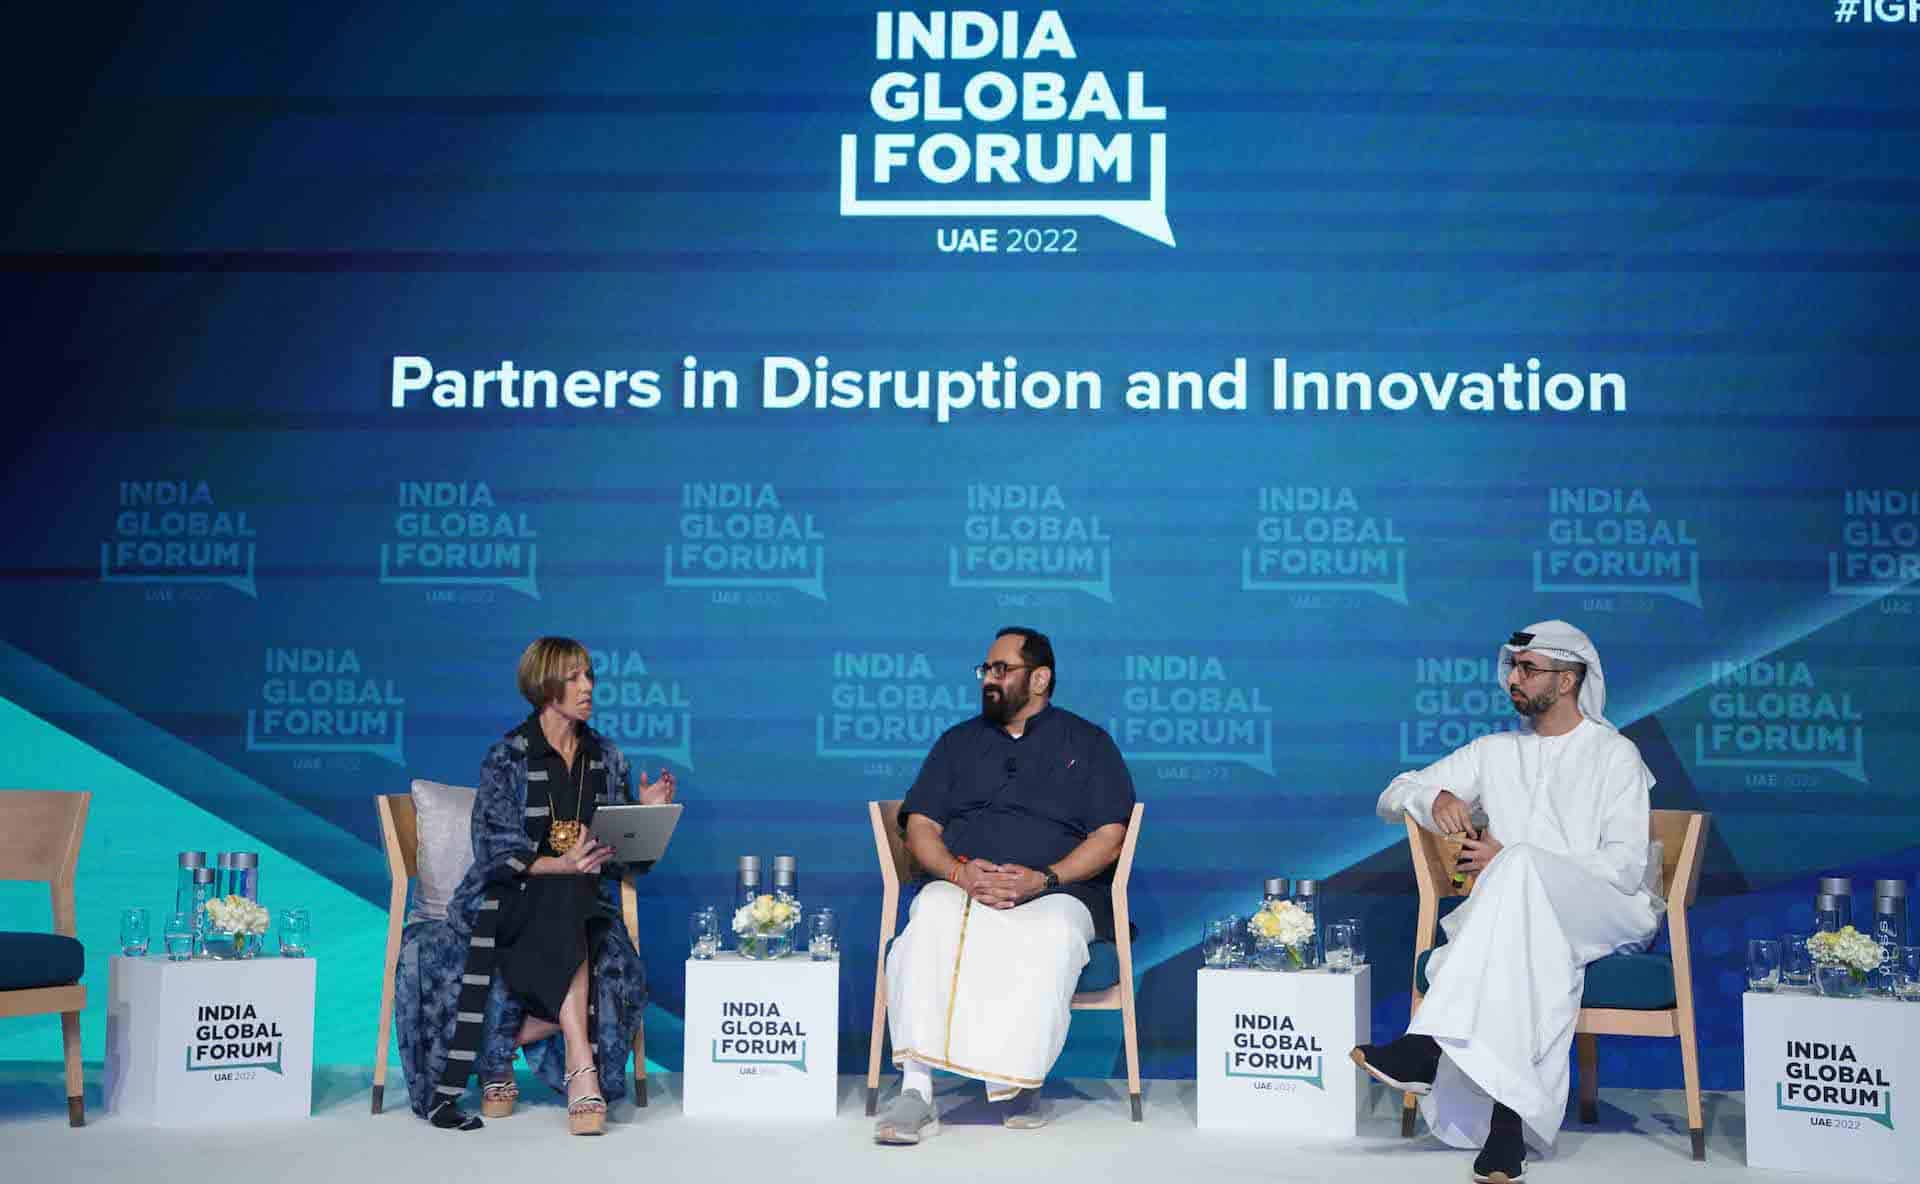 India Stack an opportunity for the Global South: Rajeev Chandrasekhar